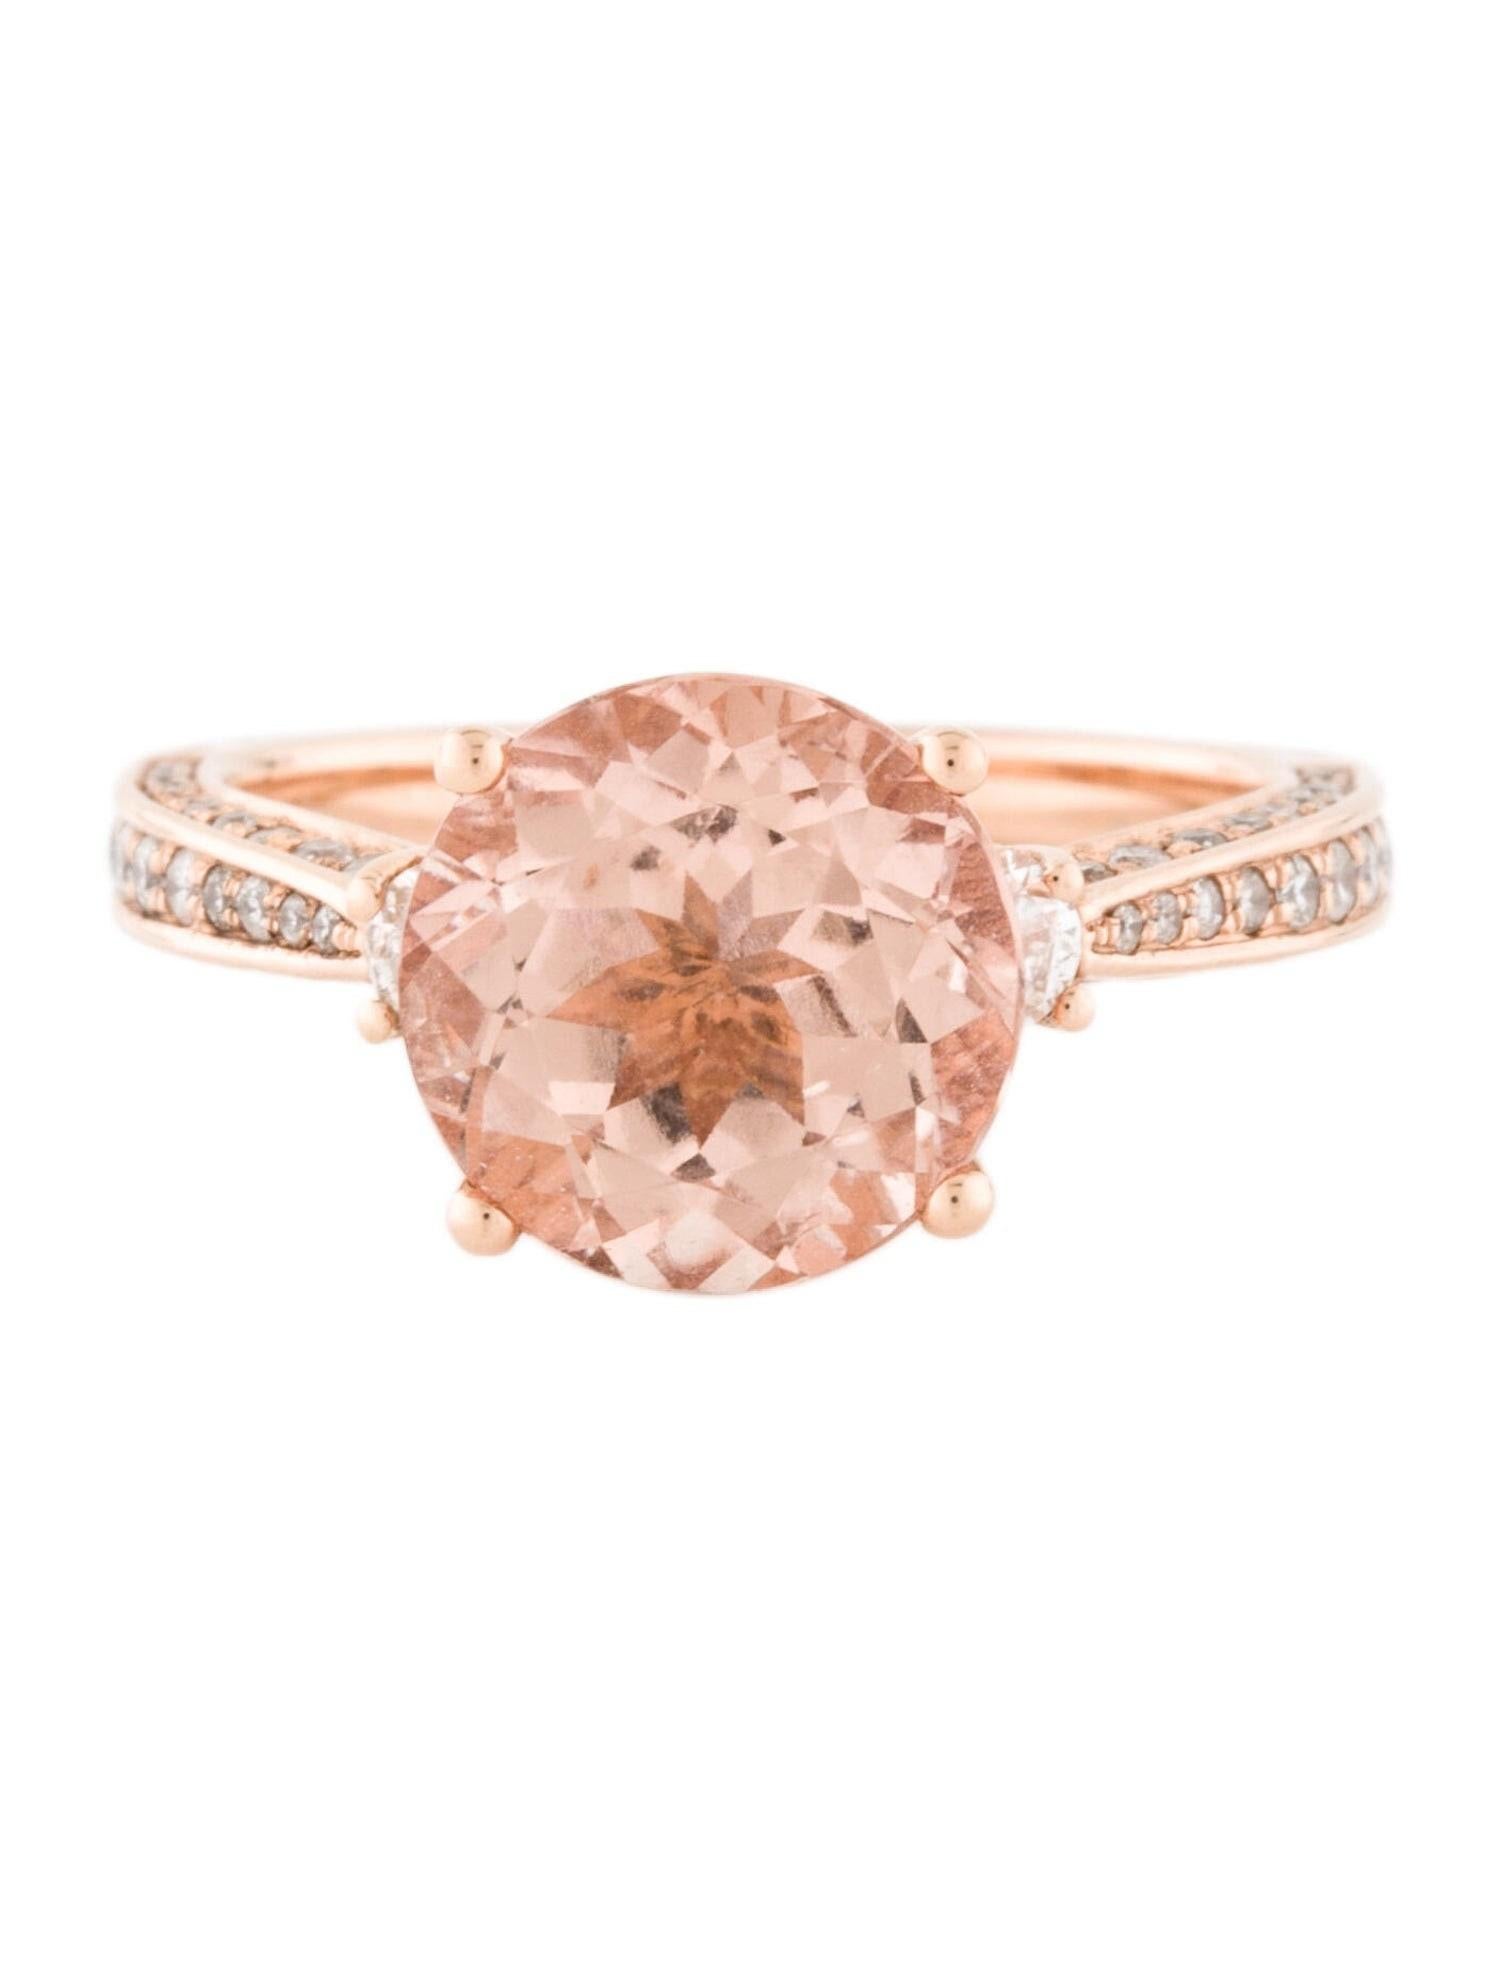 This is an alluring natural morganite and diamond ring set in solid 14K rose gold. The natural round cut 3.29 Ct morganite has an excellent peachy pink color and is accompanied by round cut white diamonds. The ring is stamped 14K and is a true